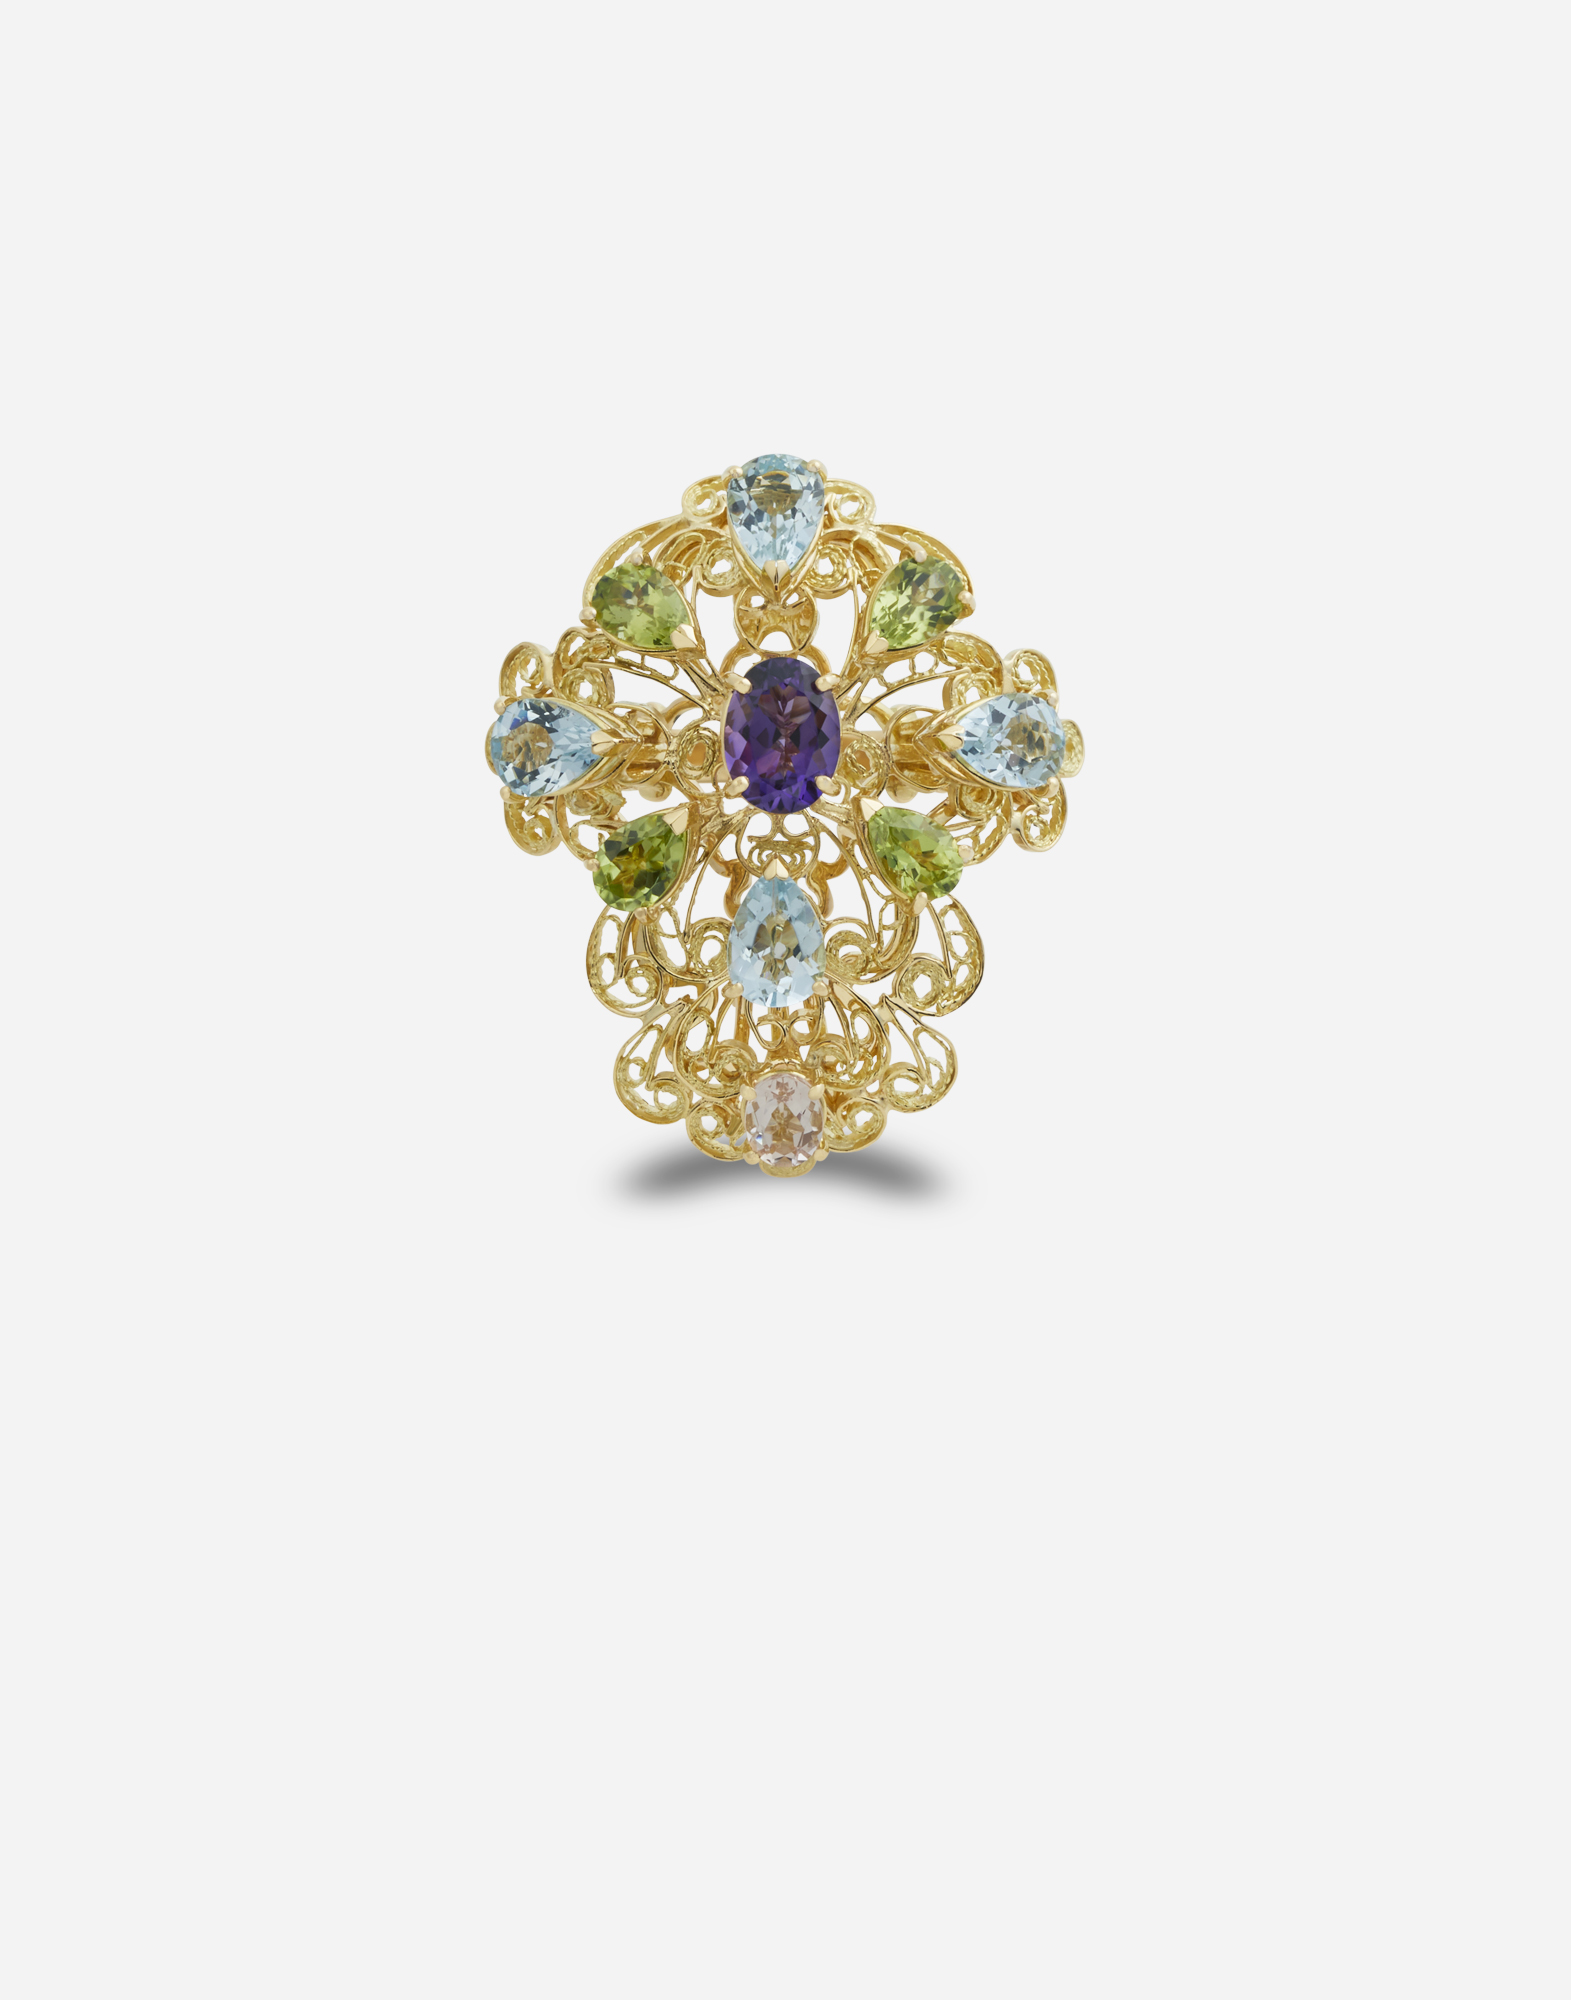 Pizzo ring in yellow gold filgree with amethyst, aquamarines, peridots and morganite in Gold